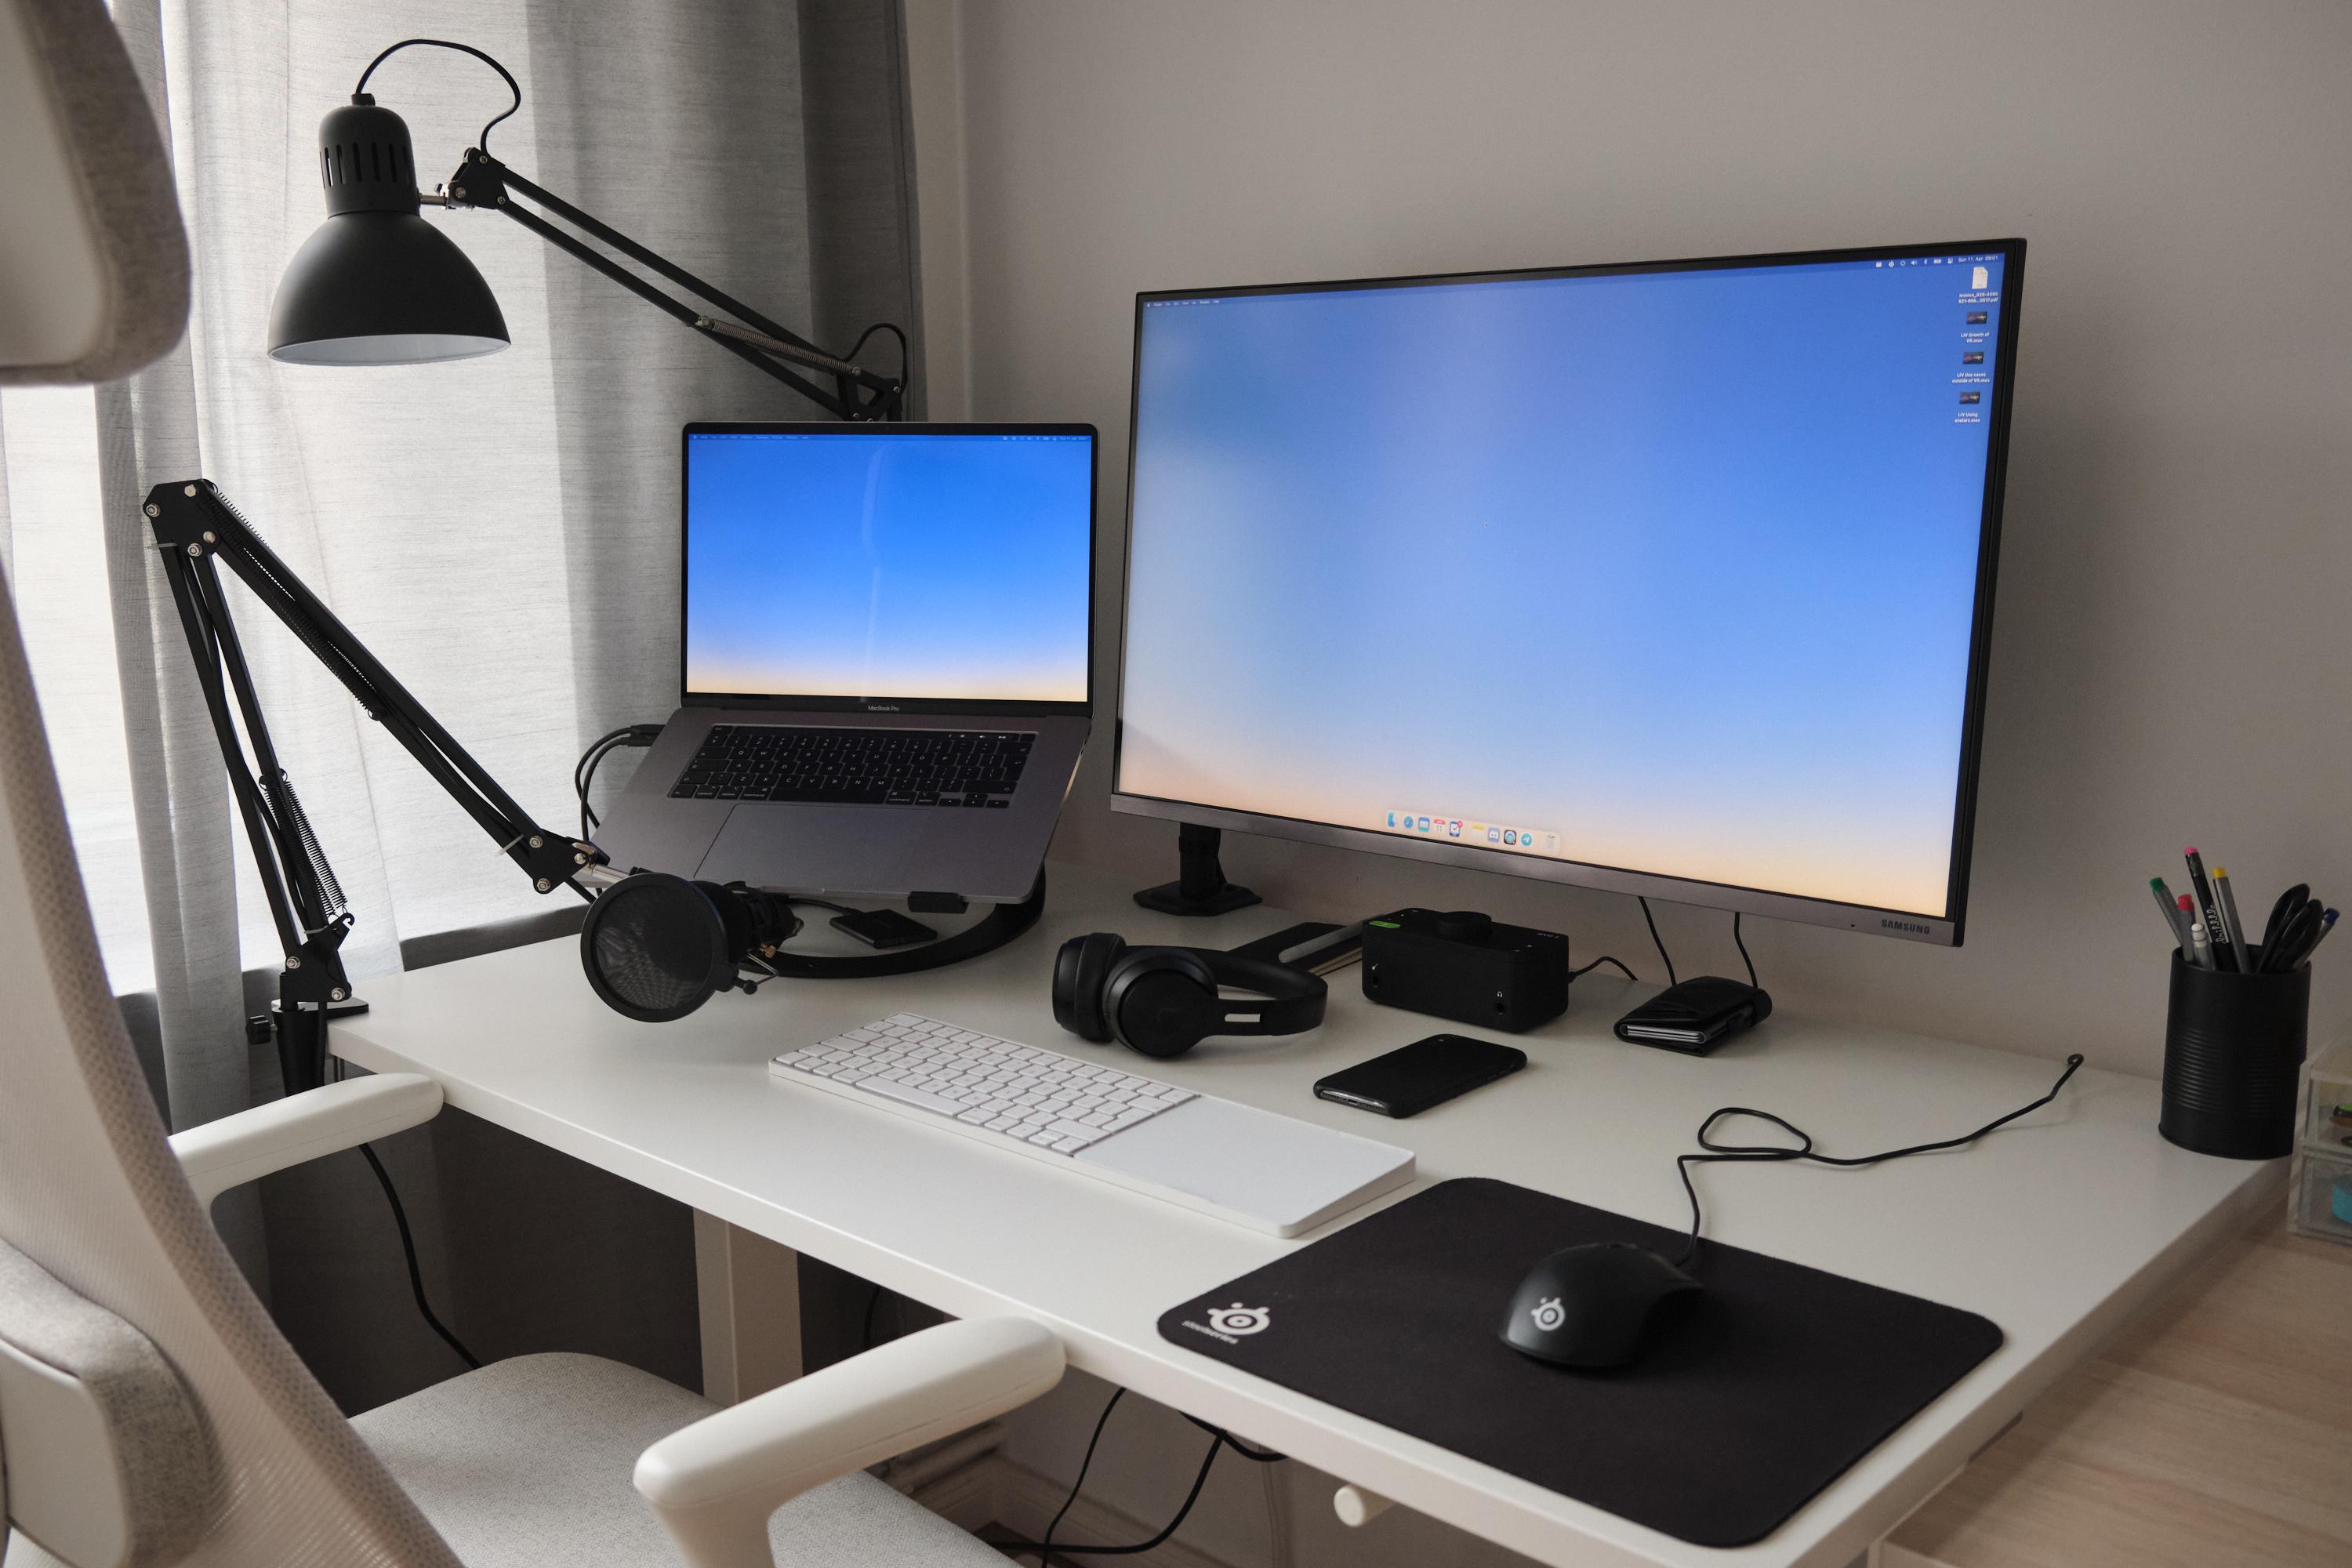 Preconception get annoyed Exceed Work/podcasting/gaming setup sees major upgrades [Setups] | Cult of Mac